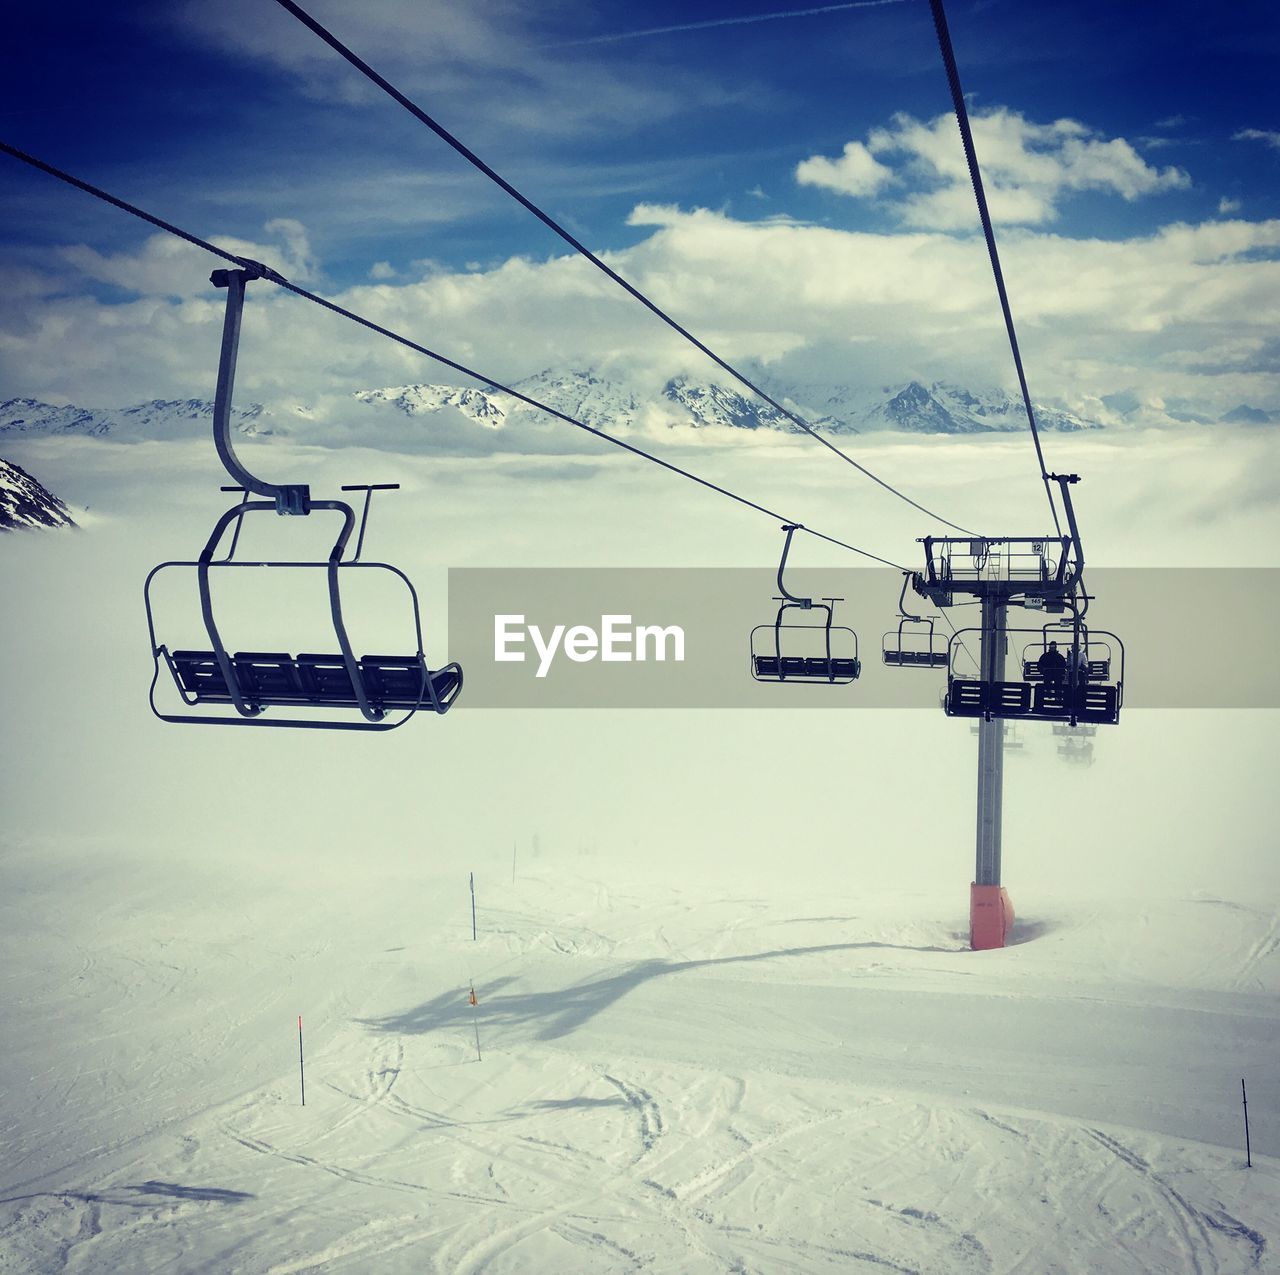 OVERHEAD CABLE CARS IN SNOW